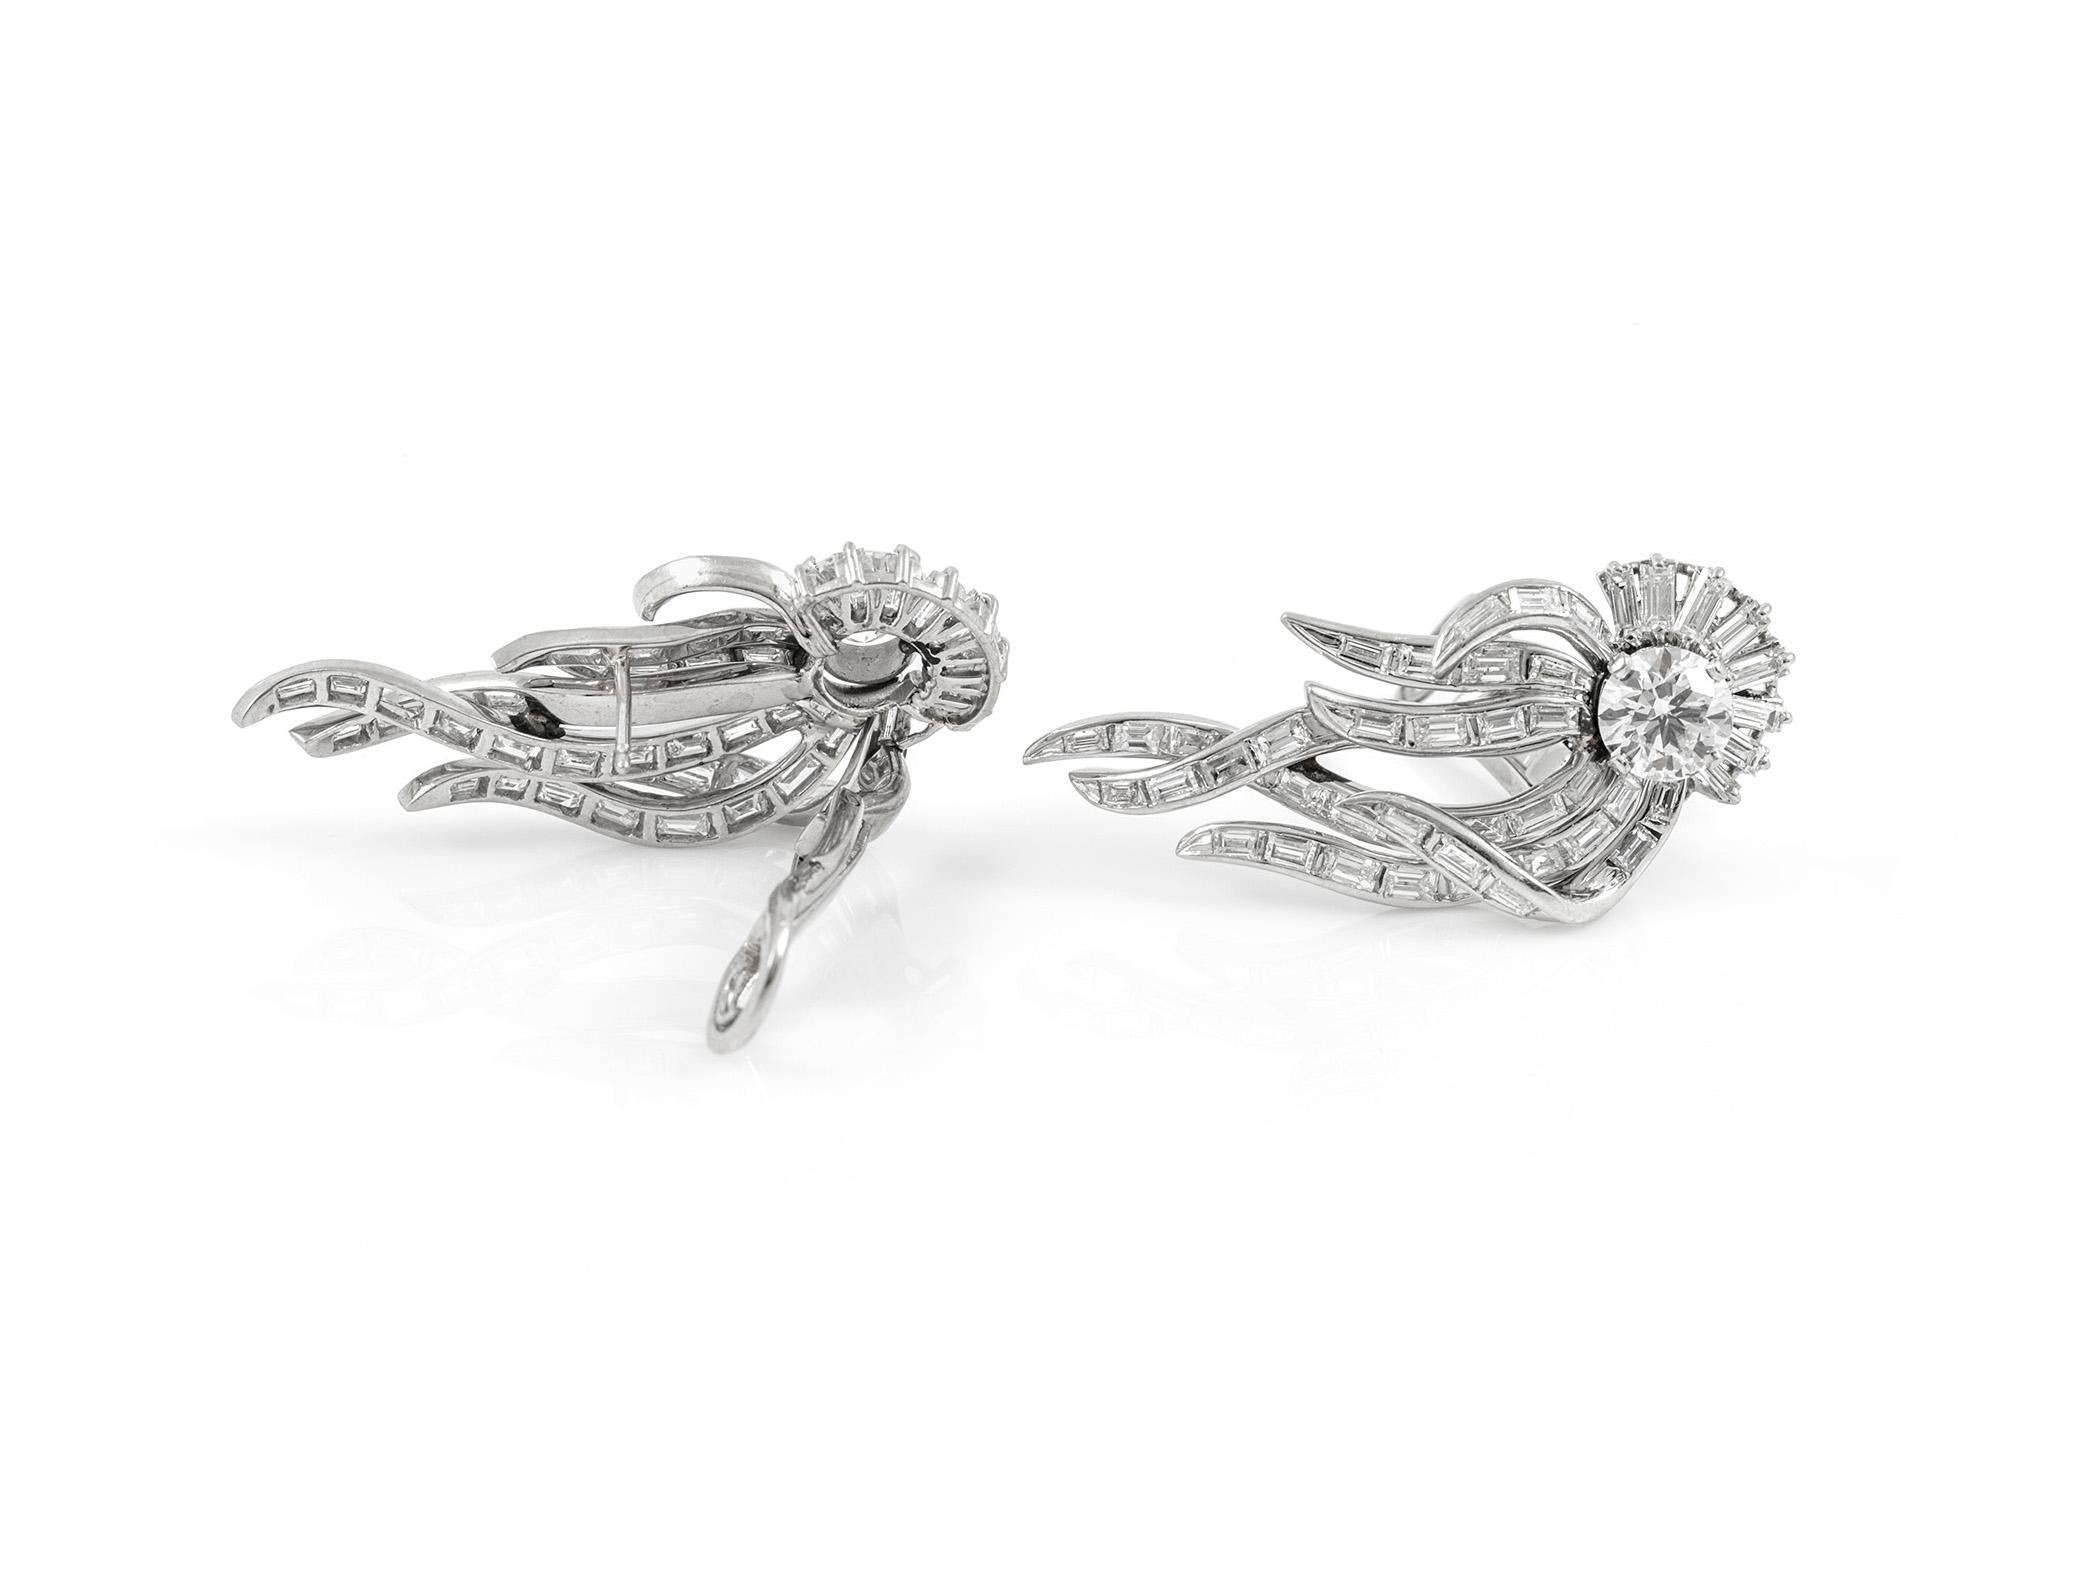 The earrings are finrly crafted in platinum with two center round diamnds weighing approximately total of 2.60 carat and all around diamonds weighing approximately total of 5.00 carat.